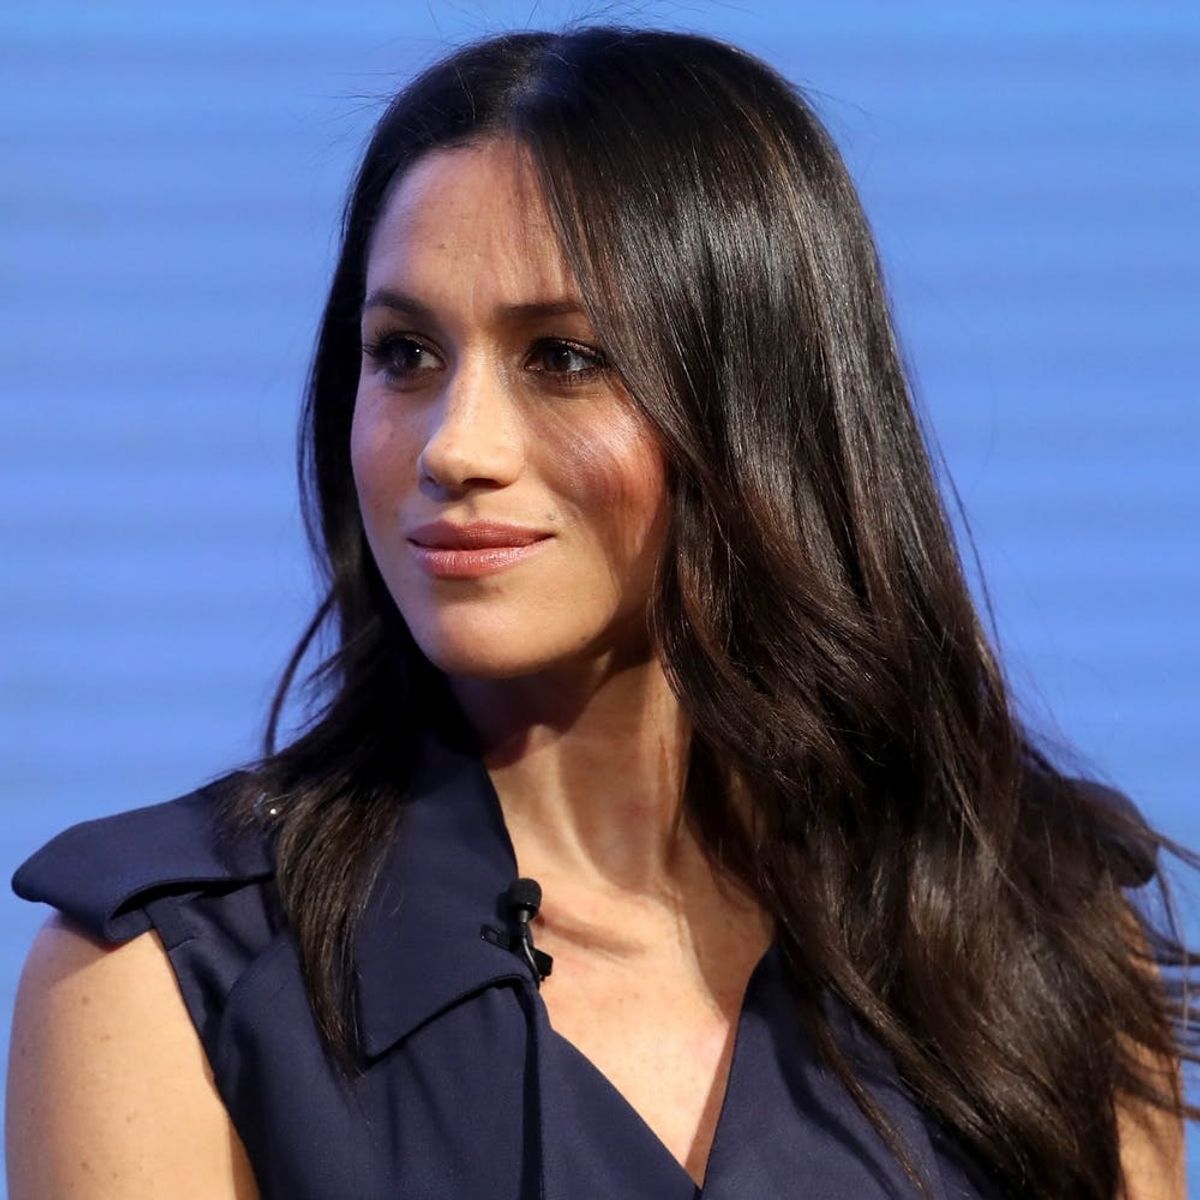 Meghan Markle Speaks Out on the Situation With Her Dad Ahead of the Royal Wedding